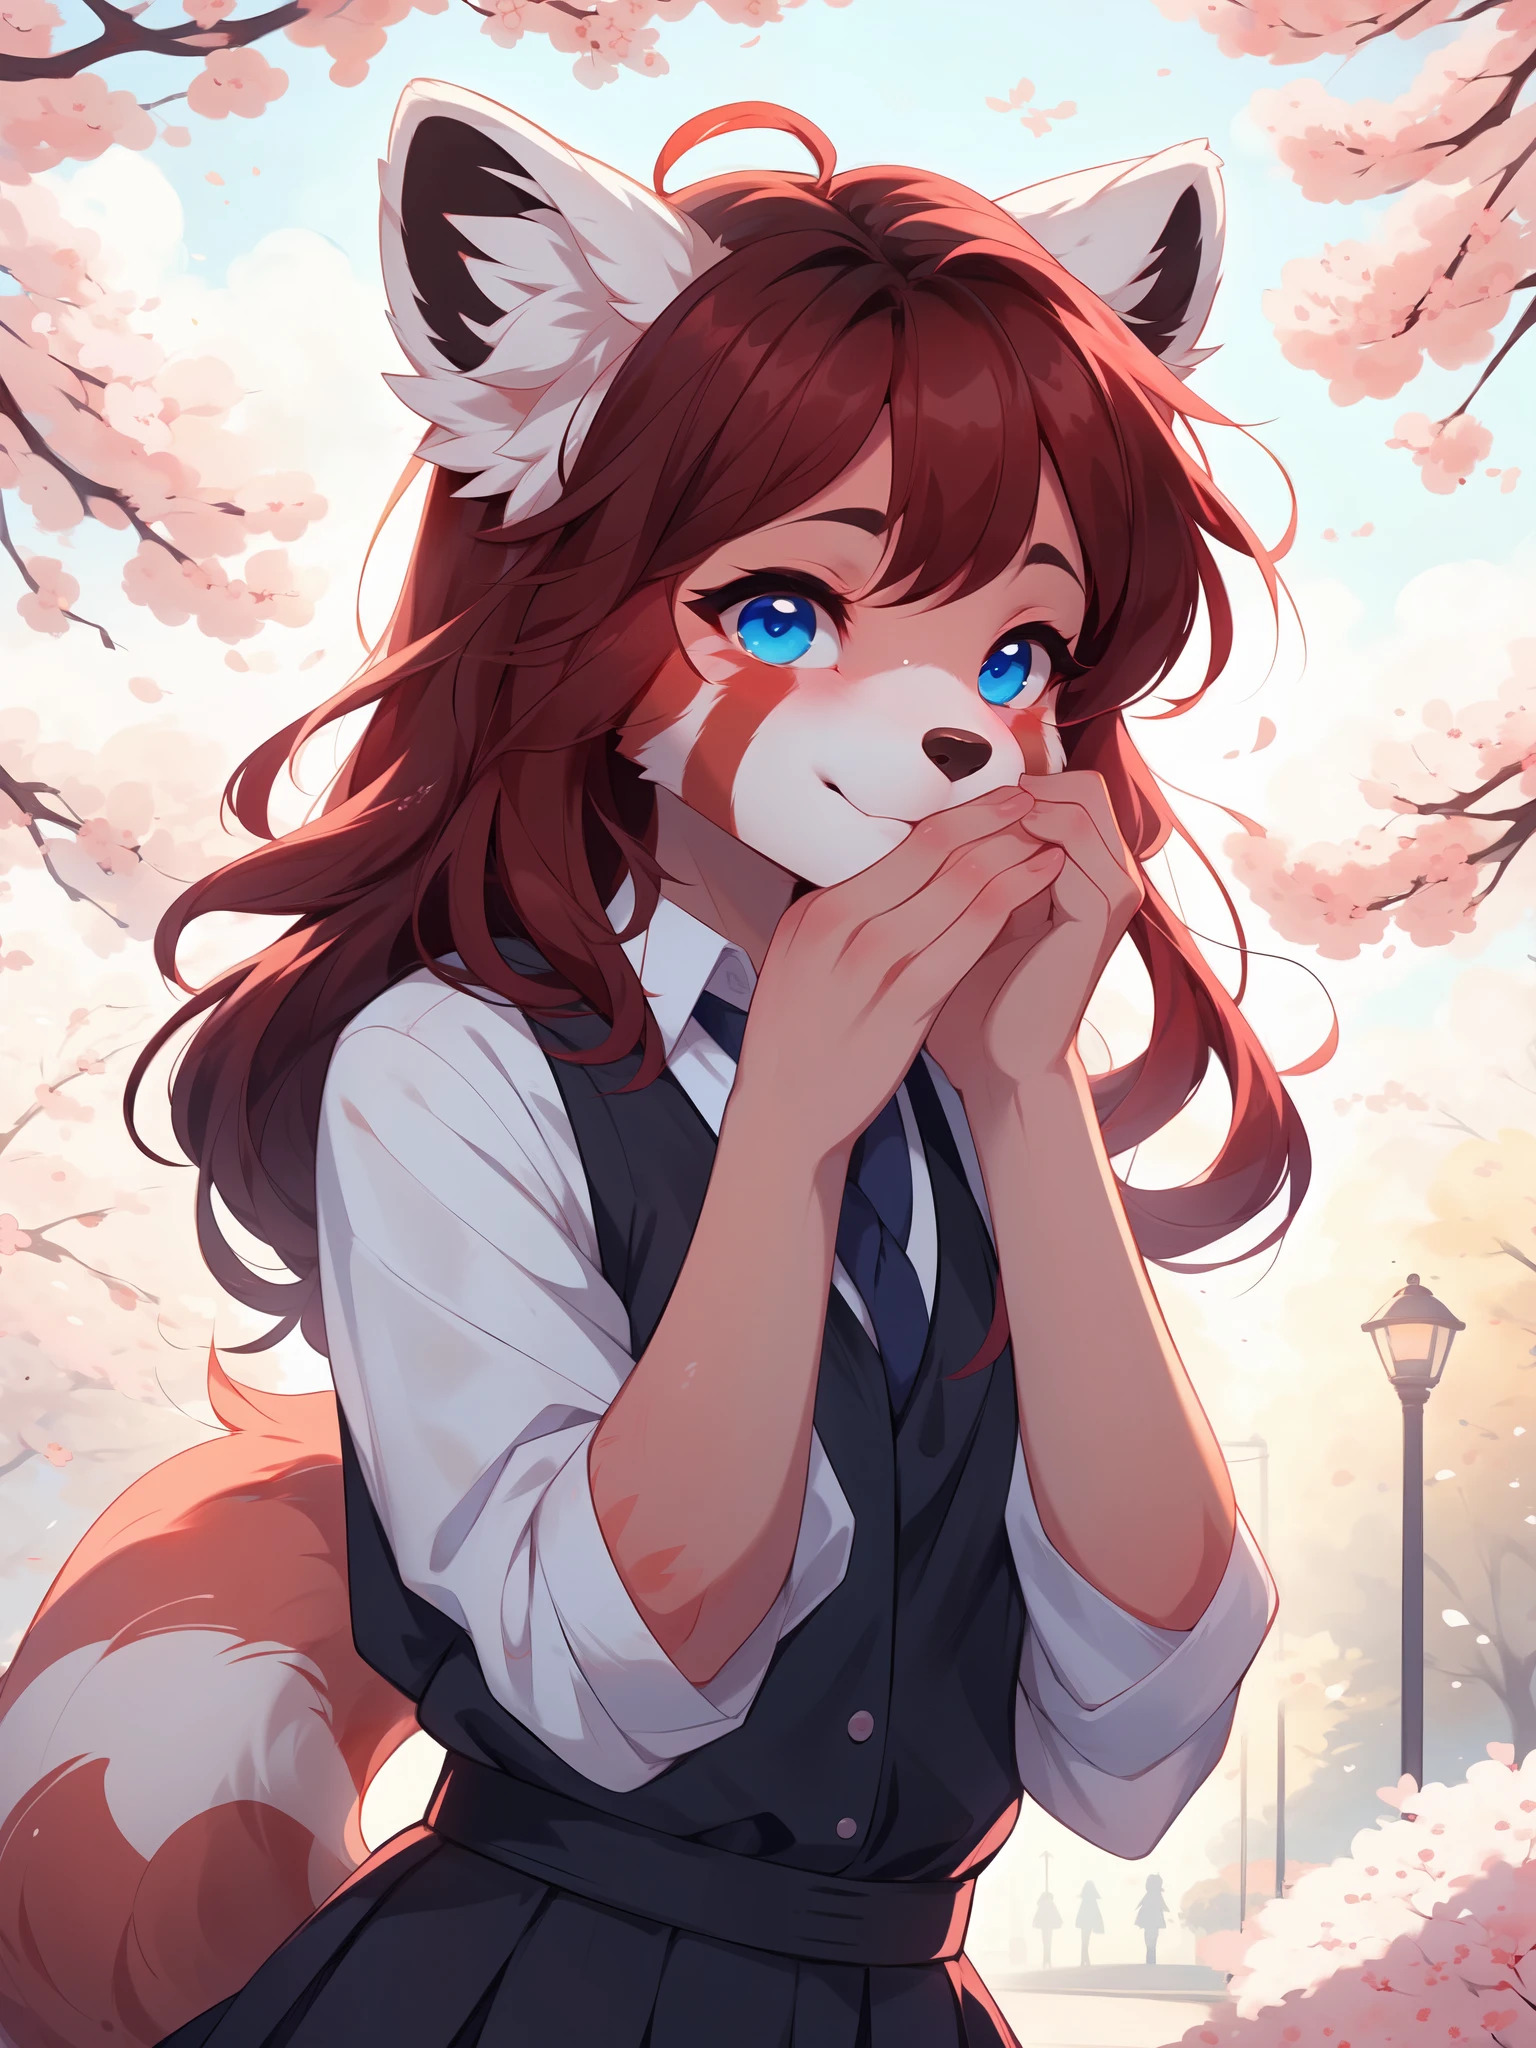 By fumiko, by hyattlen, by hioshiru, a cute red panda girl, red hair, blue eyes, , in a park, cherry blossom park, bashful pose, hands on her face, close up, a girl in the background 